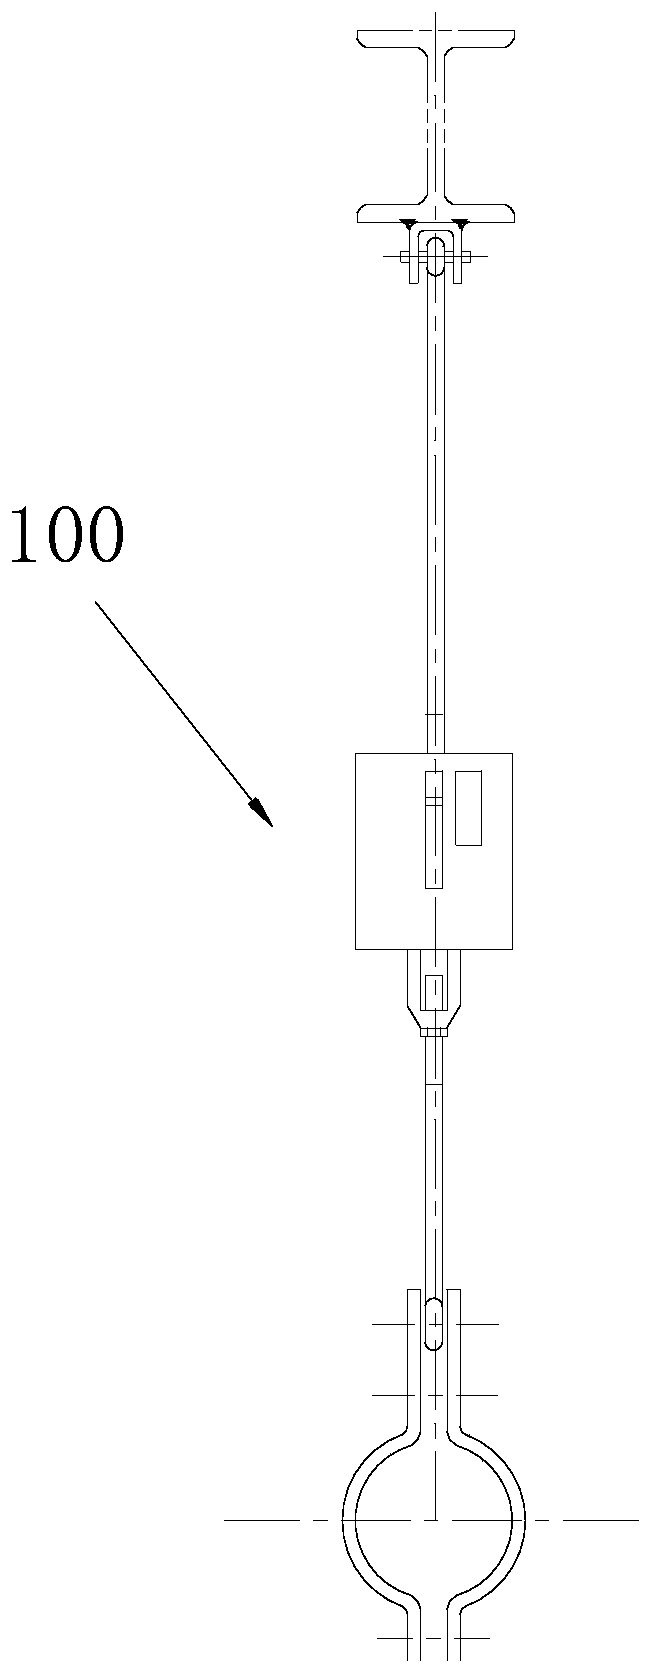 Support and hanger quantifying, mounting, detecting and regulating tool and method using same to perform support and hanger load measurement